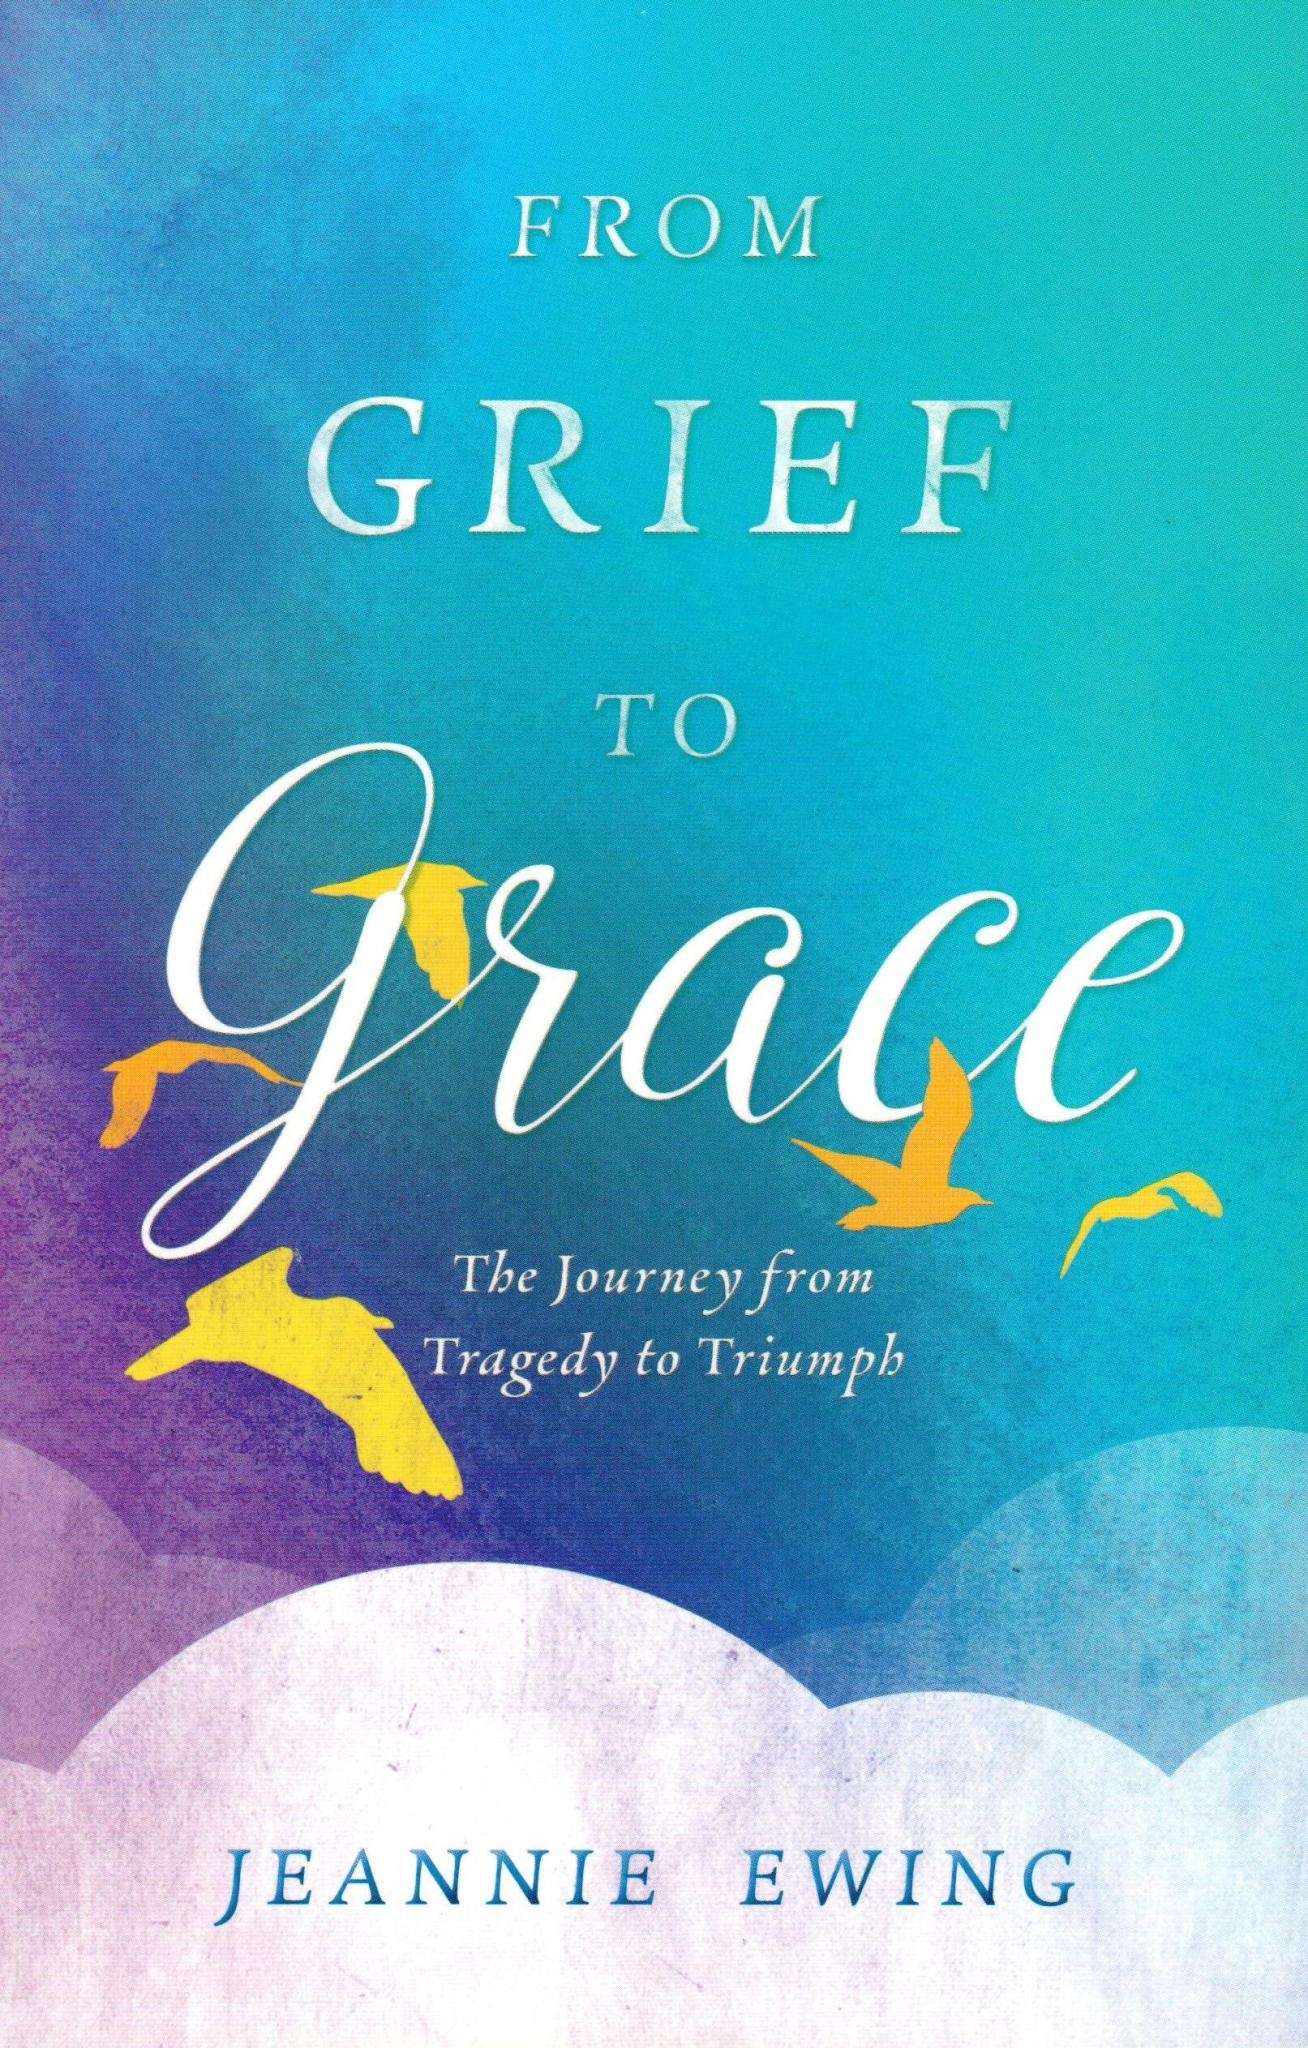 From Grief to Grace: The Journey from Tragedy to Triumph